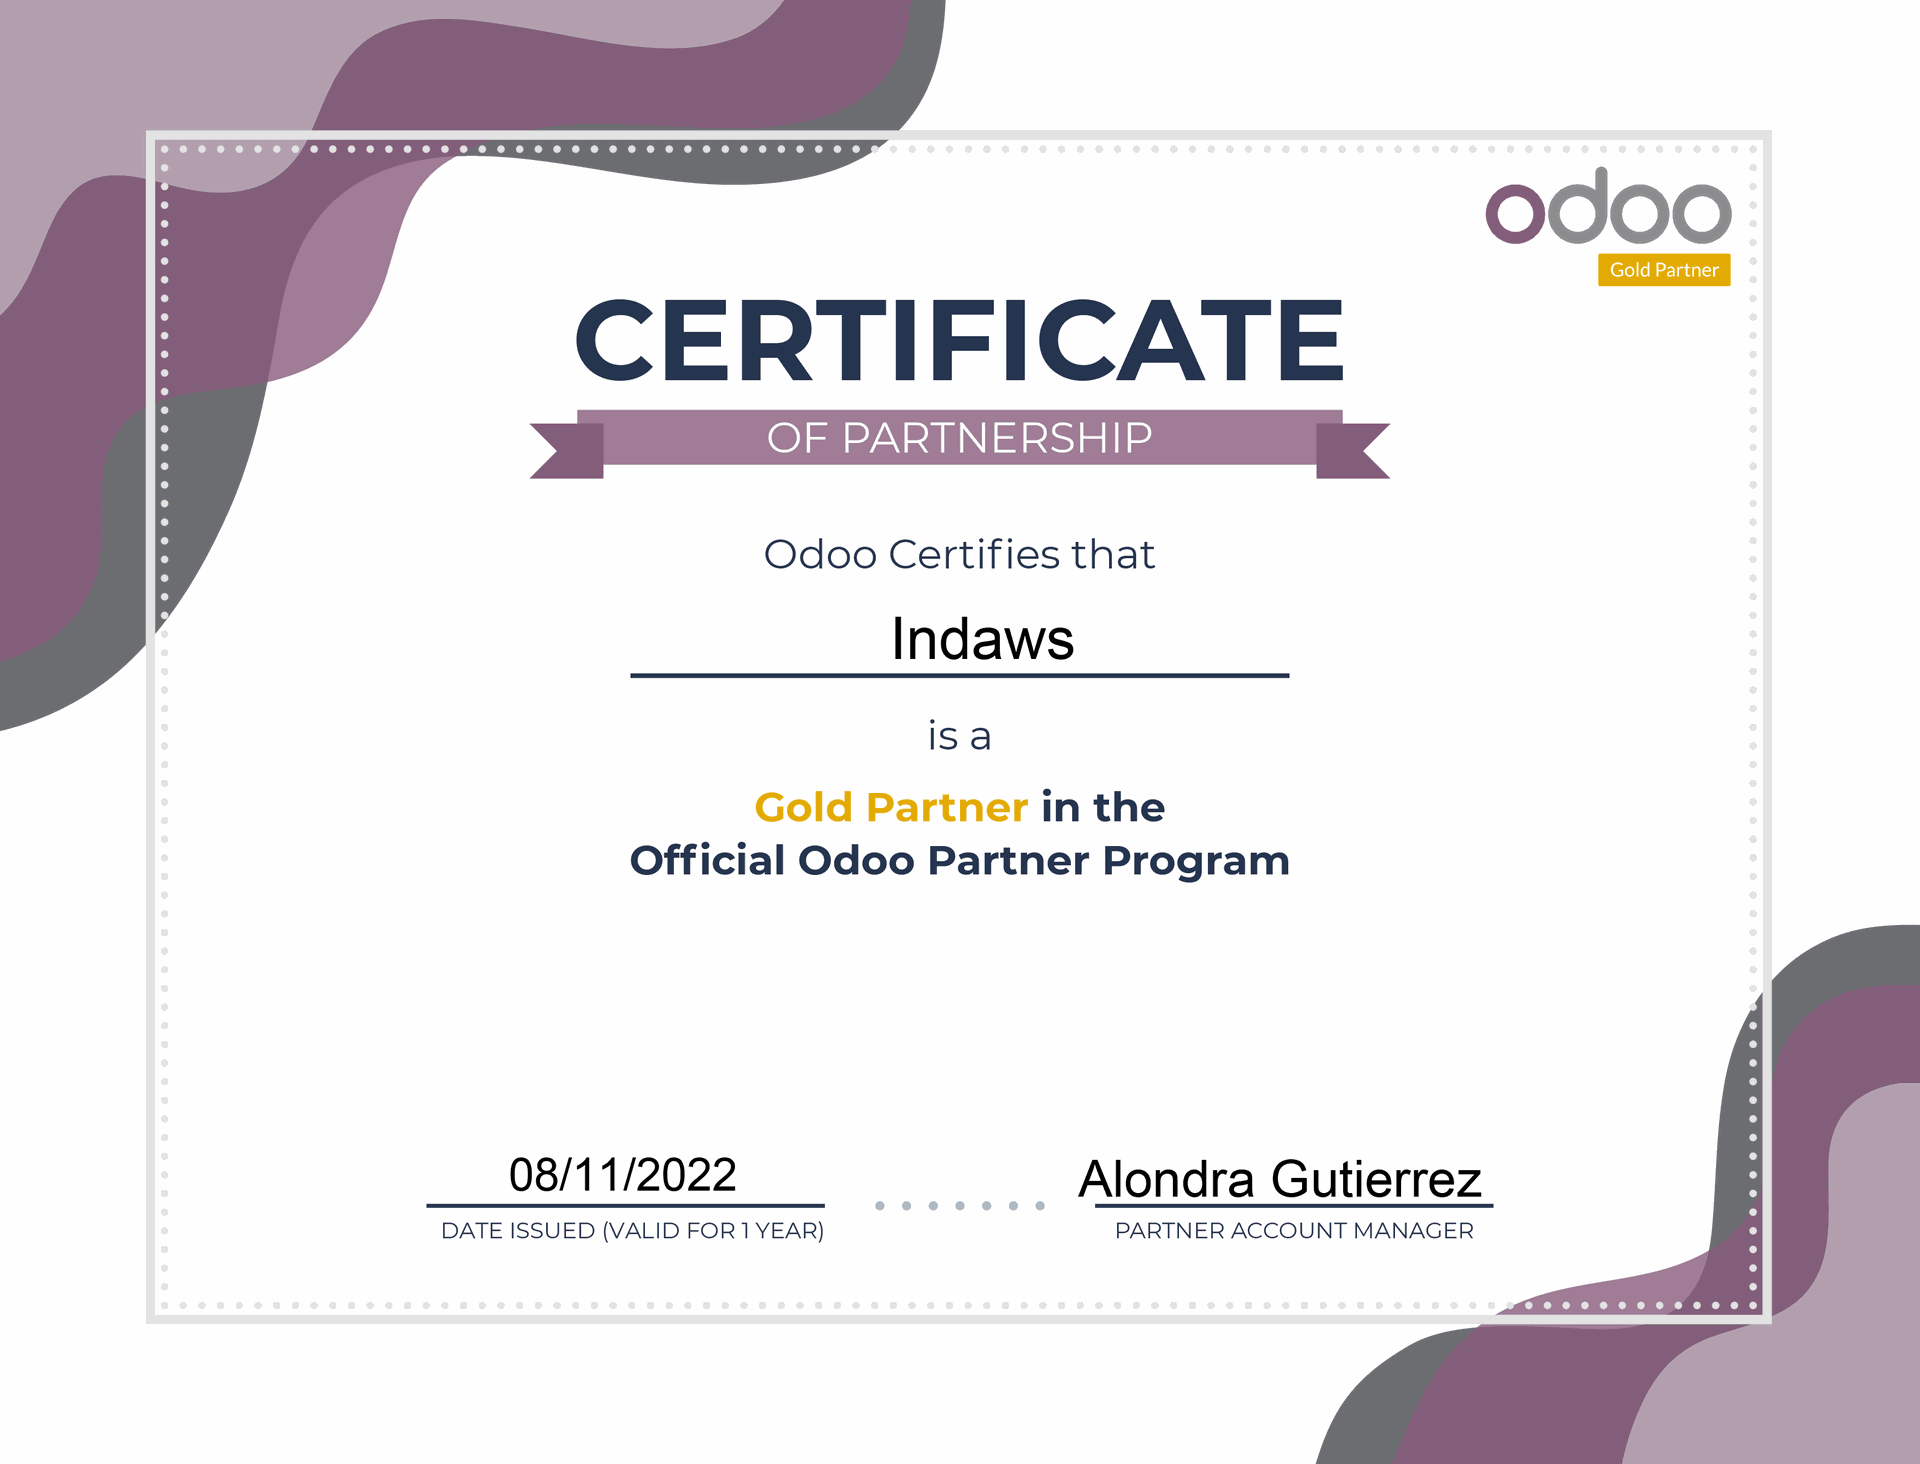 inDAWS Odoo Gold Partner